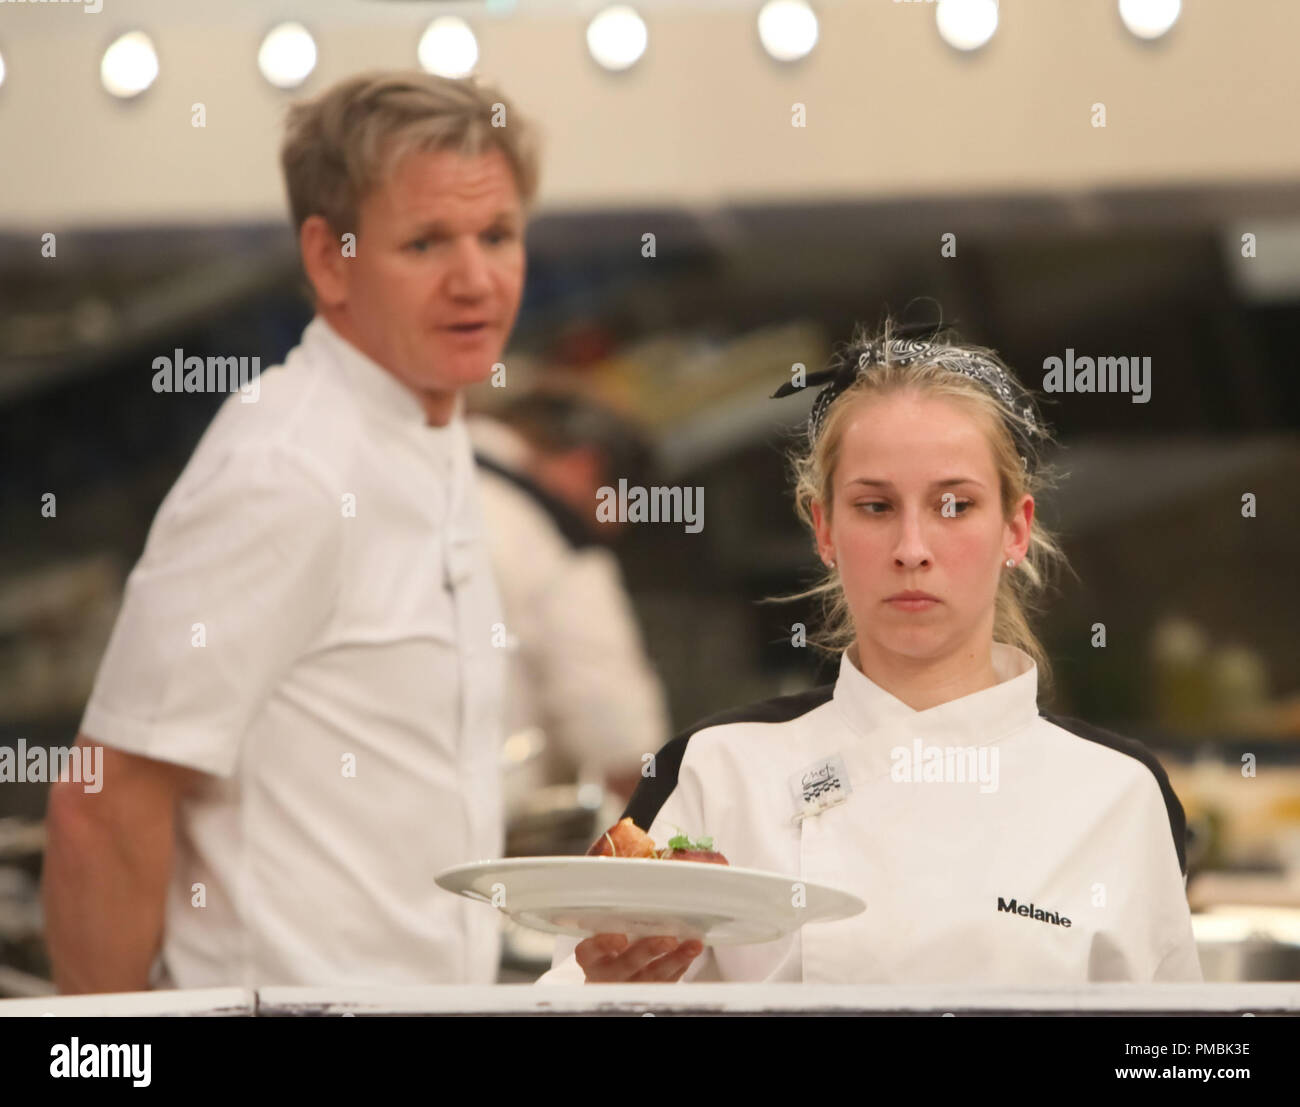 HELL'S  KITCHEN: L-R: Chef Ramsay and contestant Melanie during dinner service in '4 Chefs Compete' episode of HELL'S KITCHEN Stock Photo